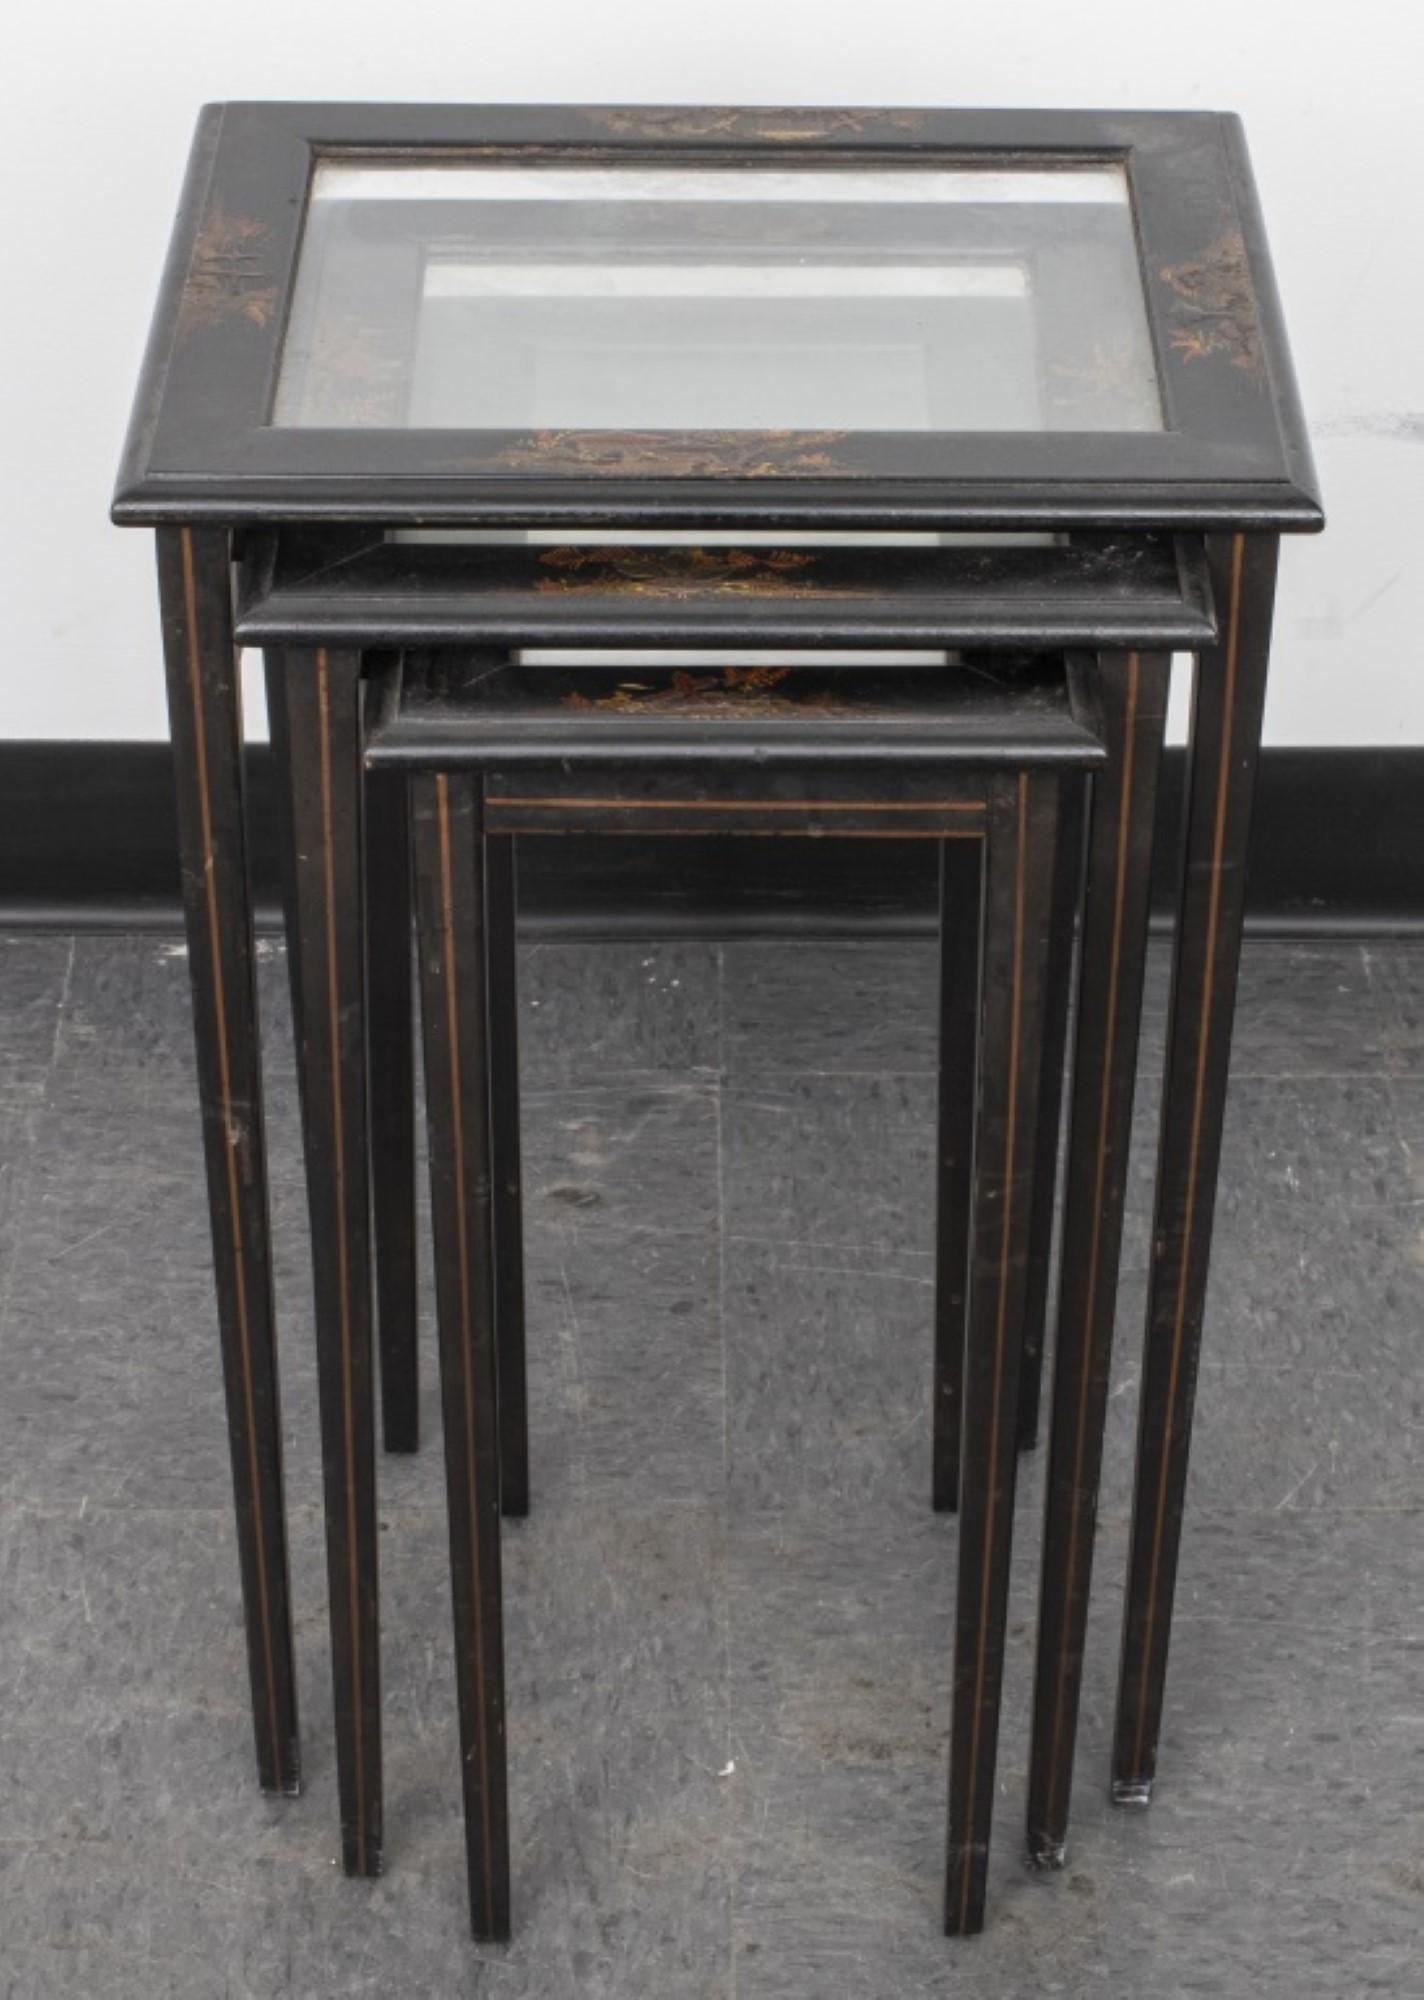 Set of Three Chinese Ebonized Nesting Tables

Features: Ebonized nesting tables with center glass inserts and polychrome architectural motifs to borders.

Dealer: S138XX